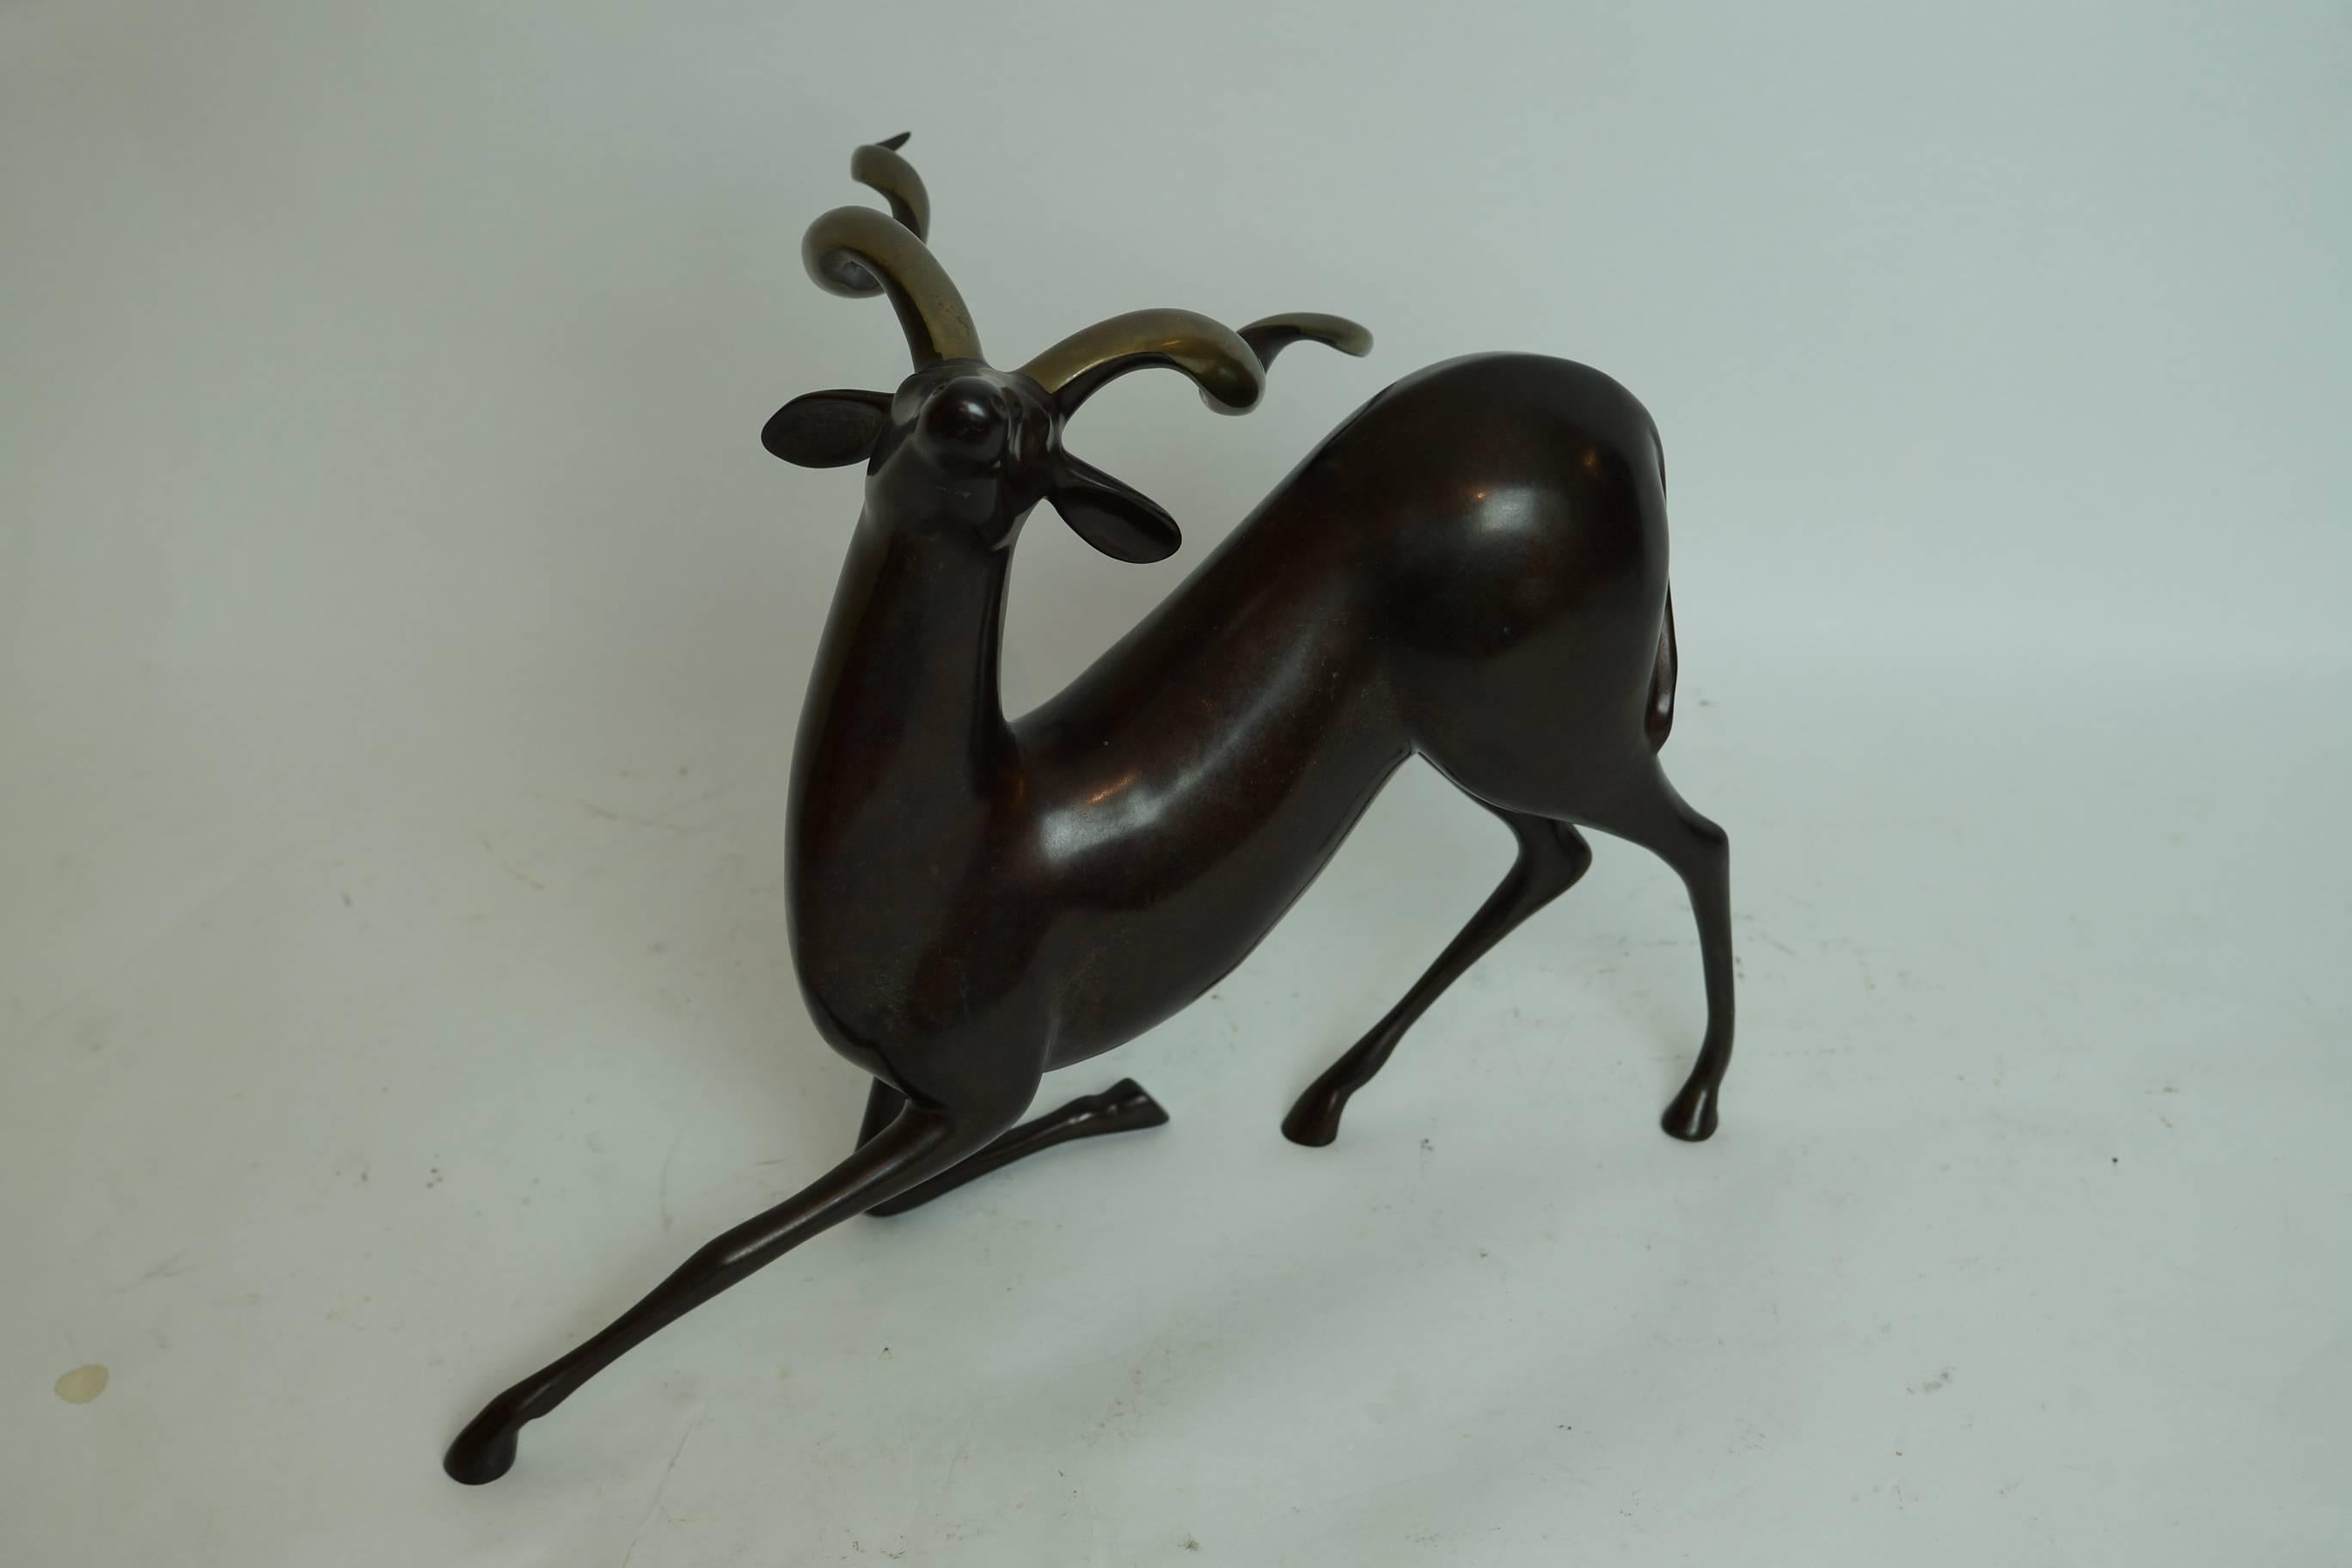 Bronze deer sculpture signed: Loet.
12/750 Loet Vanderveen (1921-2015) was born in Rotterdam, Holland. His home was very close to the zoo where during his early years, Loet spent a great deal of his time. It was during this period in life that he